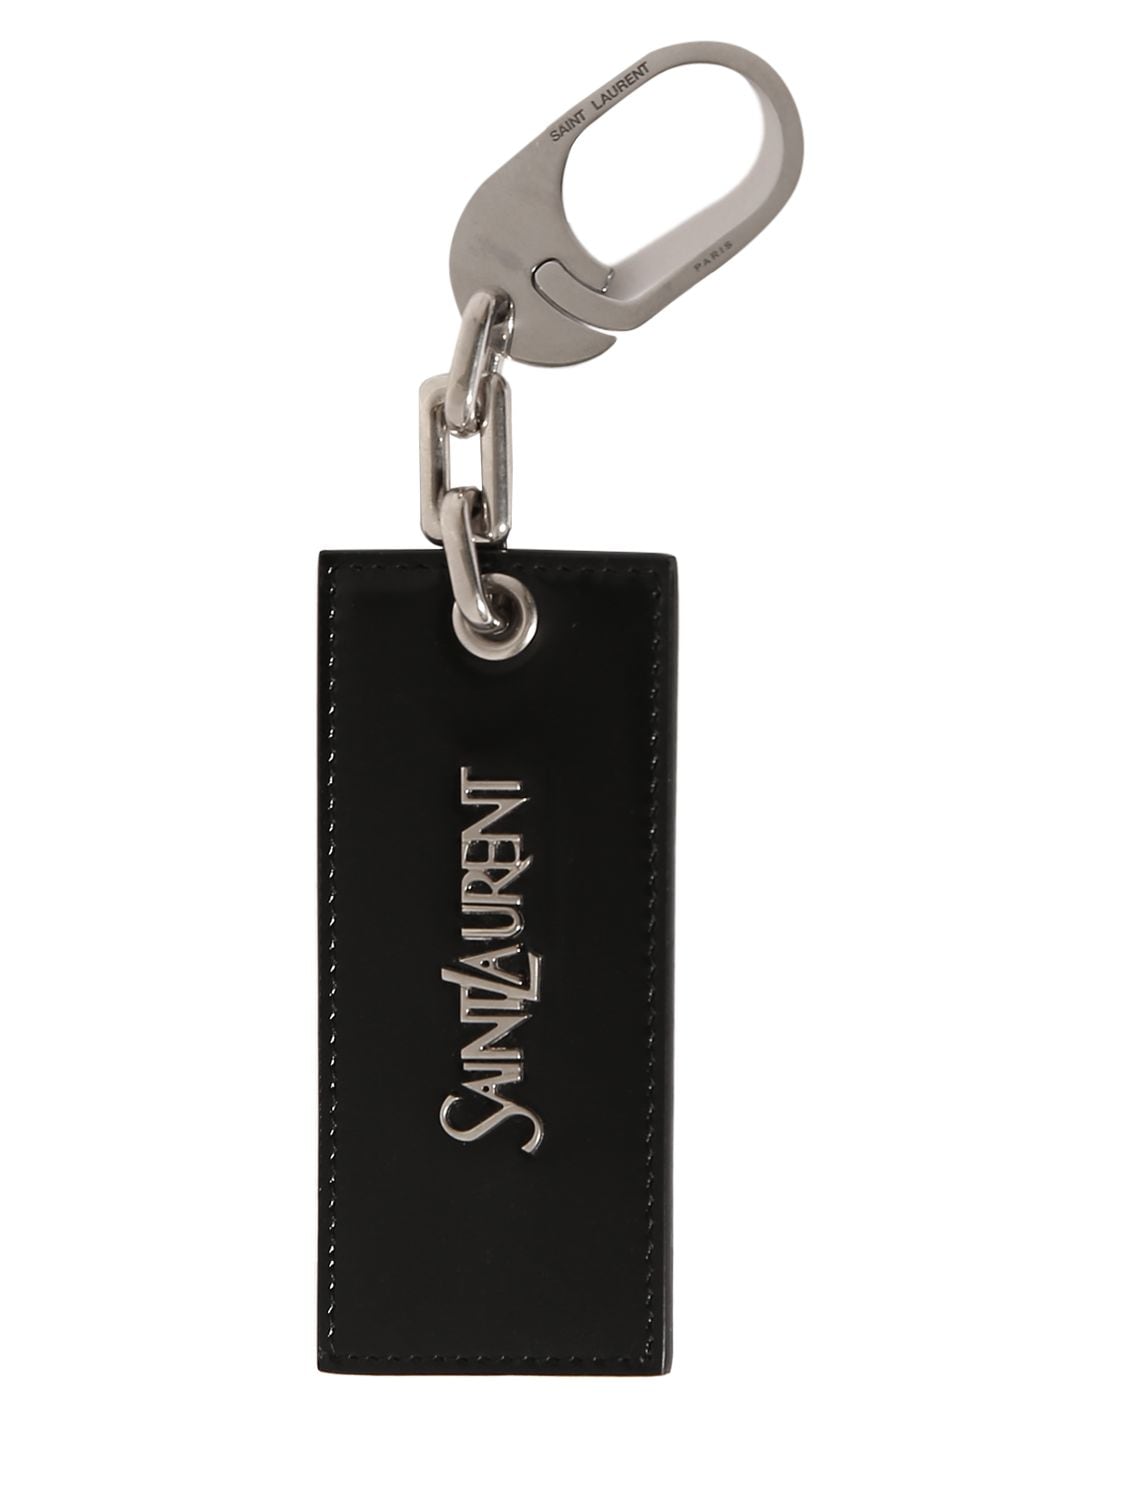 Authenticated Used Yves Saint Laurent SAINT LAURENT PARIS Saint Laurent  Yves YSL key ring chain 518323 2021 autumn / winter new leather black x  silver